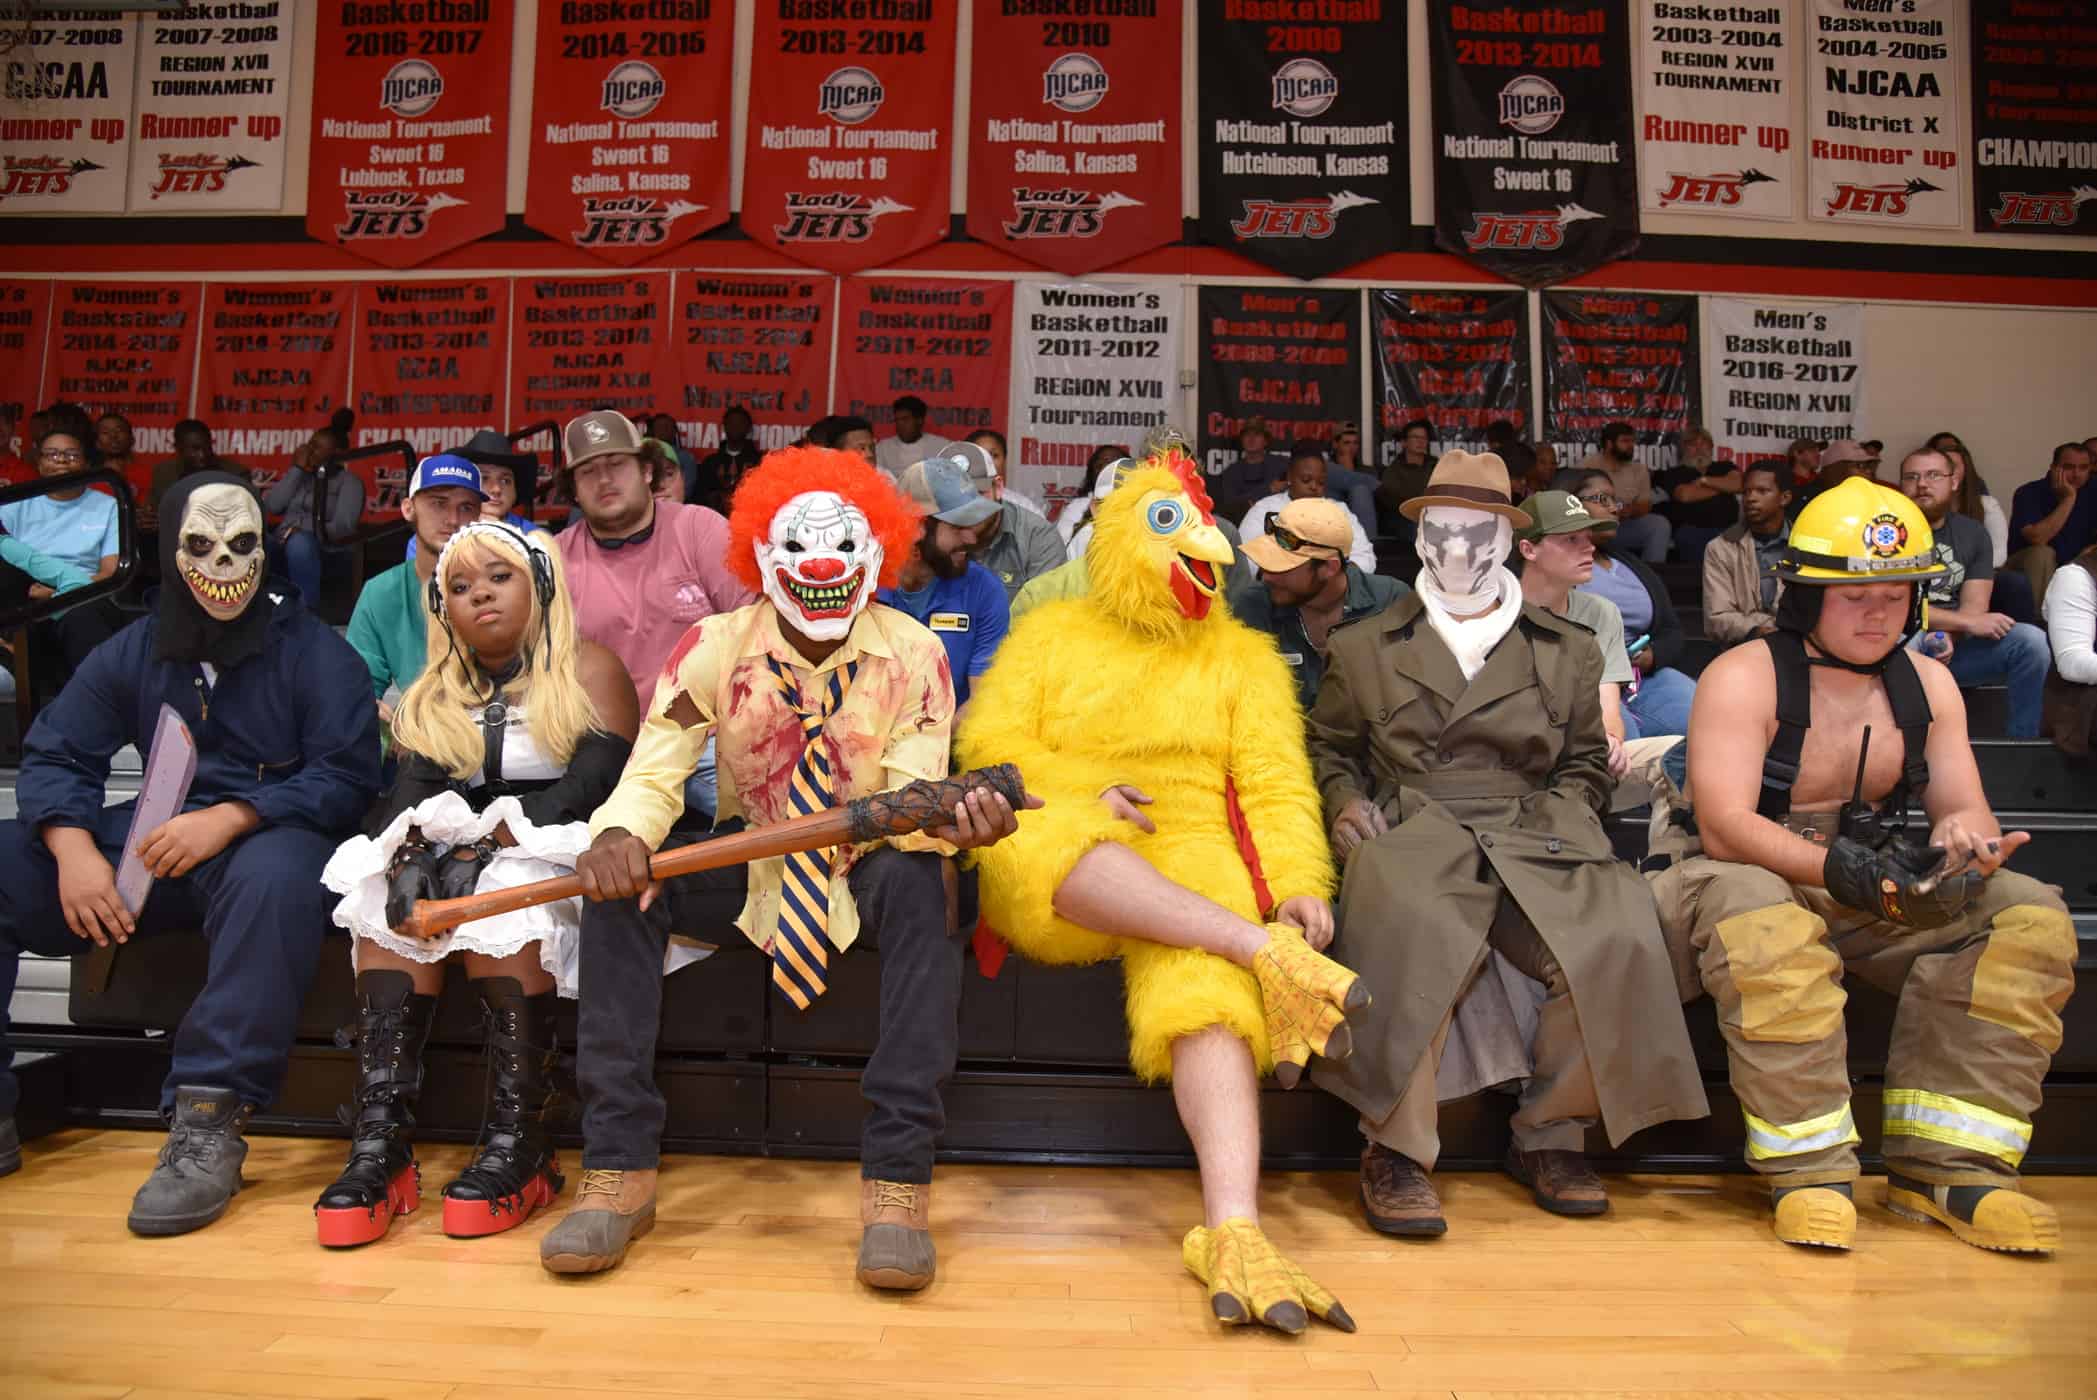 A group of costumed people sit on the front row of bleachers